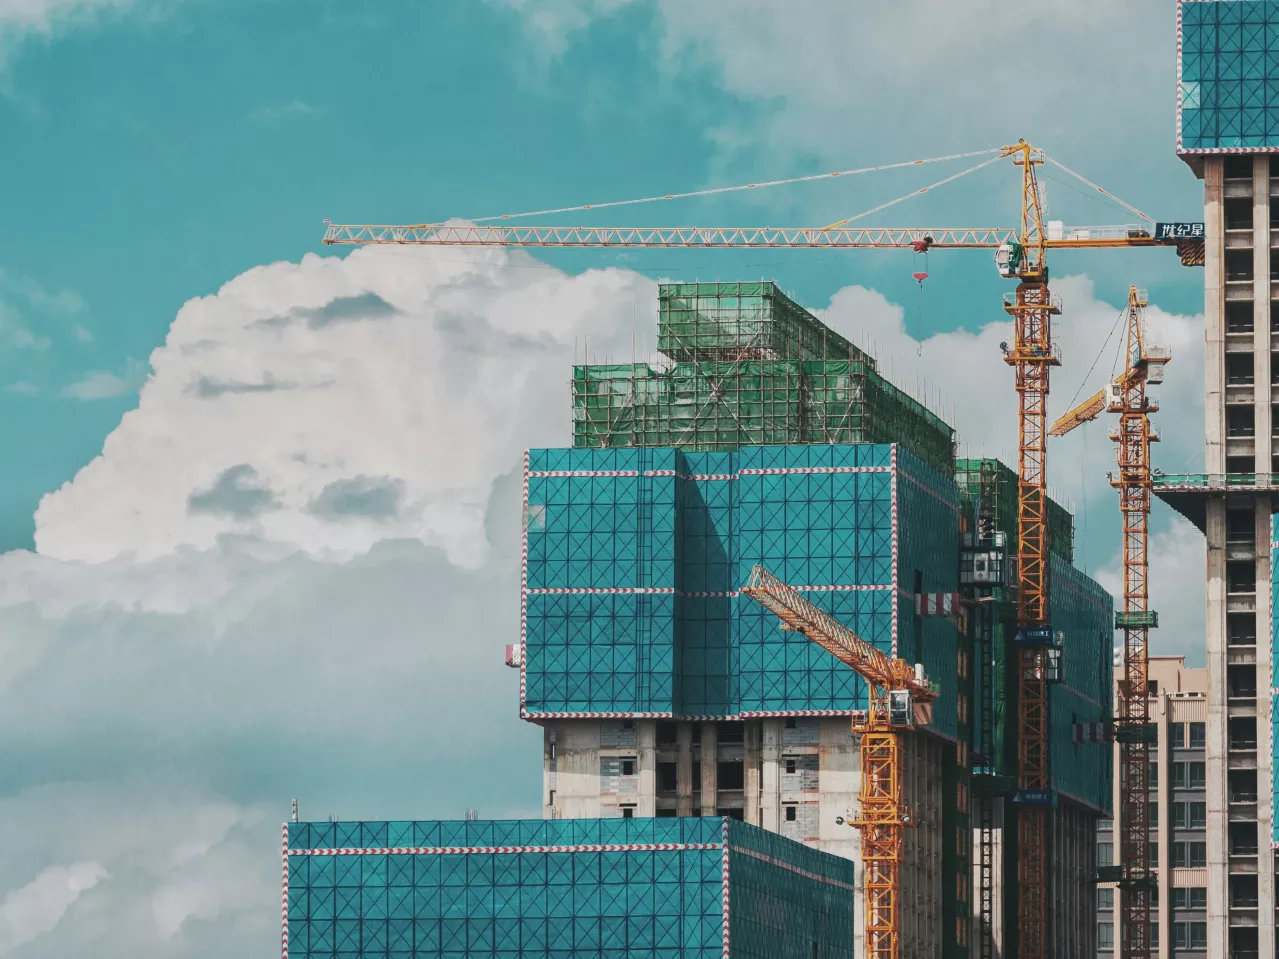 High-rise buildings under construction with scaffolding, covered in green mesh, and large yellow cranes against a cloudy sky.